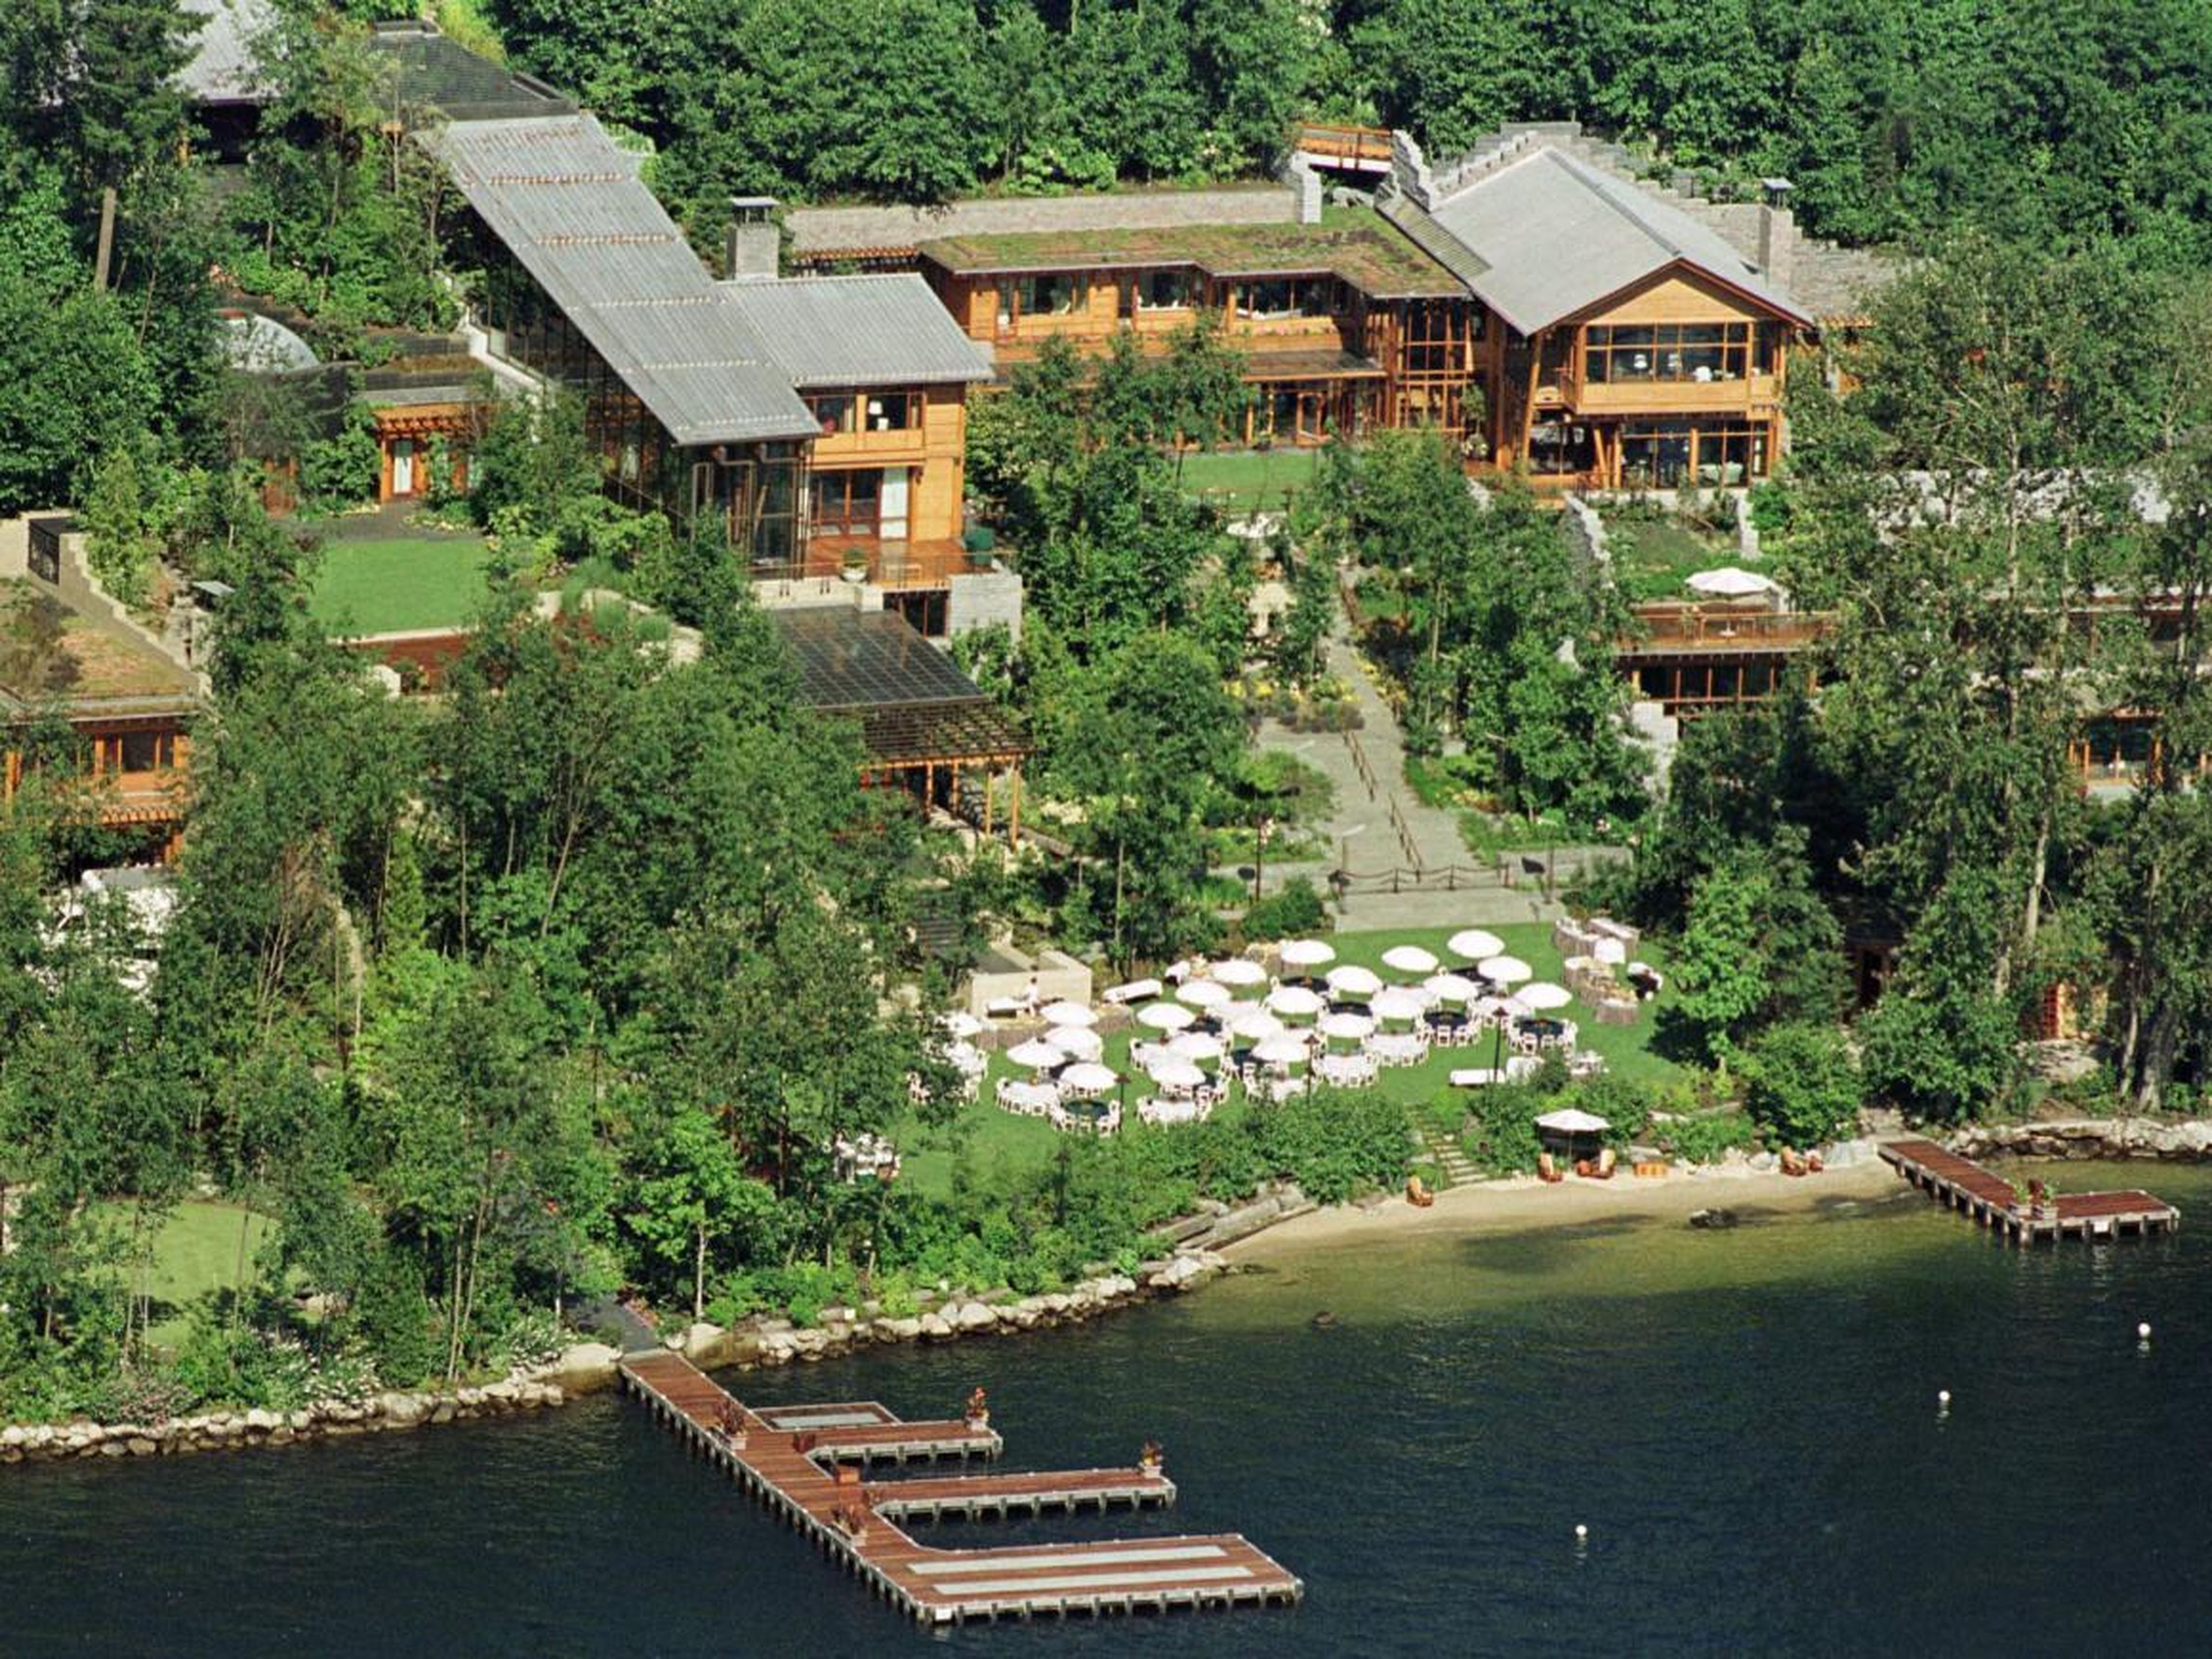 Gates also spent a lot on his estate, "Xanadu 2.0," in Medina, Washington. It took him seven years and $63 million to build. He purchased the lot for $2 million in 1988.